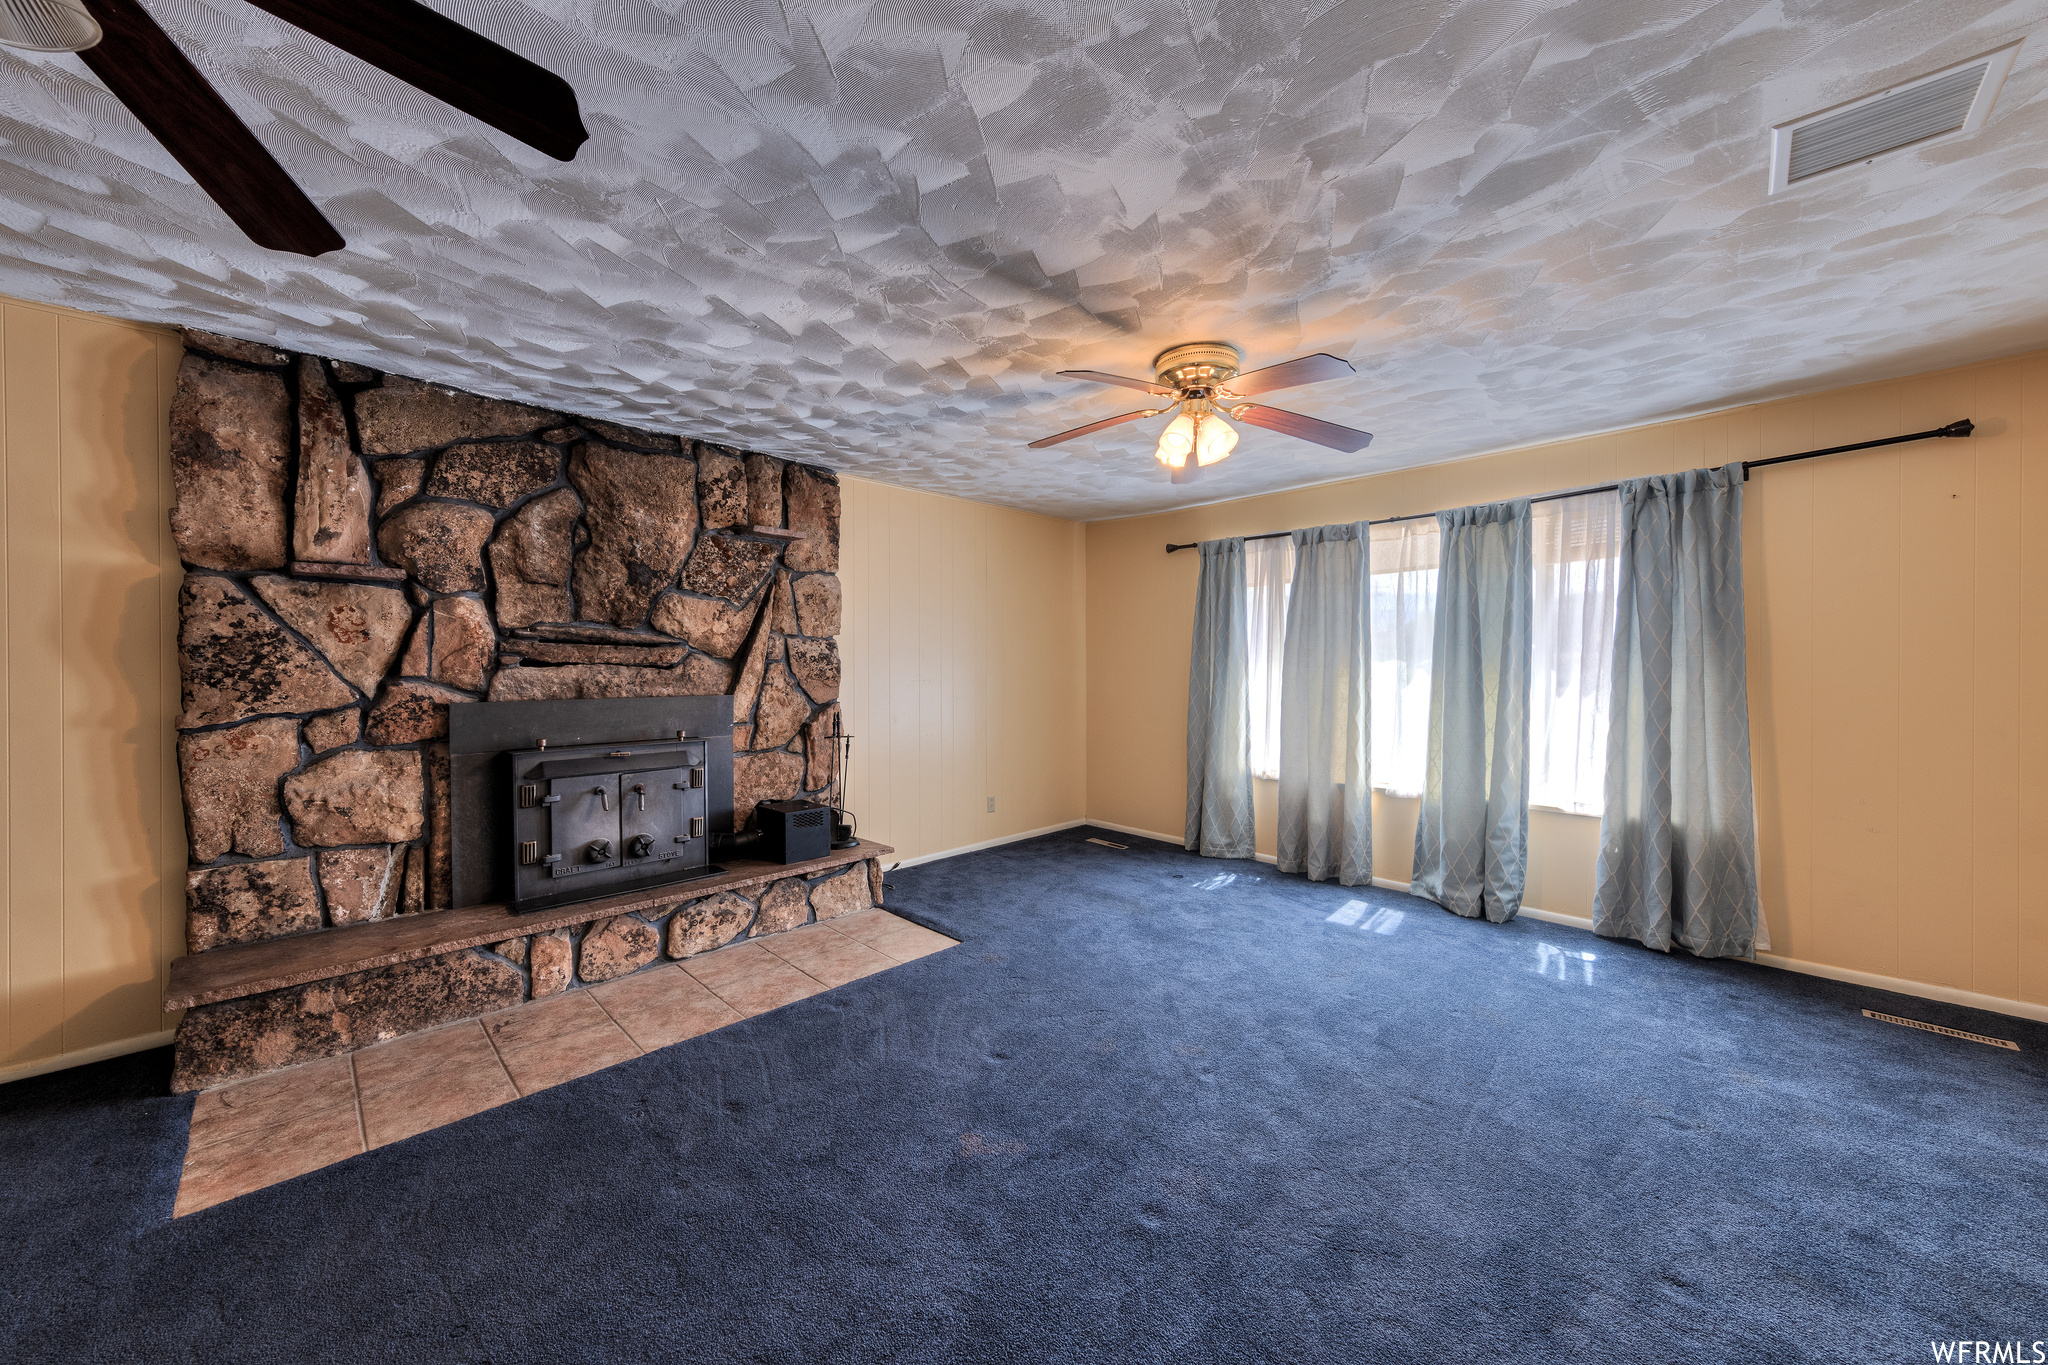 Living room featuring a fireplace, natural light, a ceiling fan, and carpet